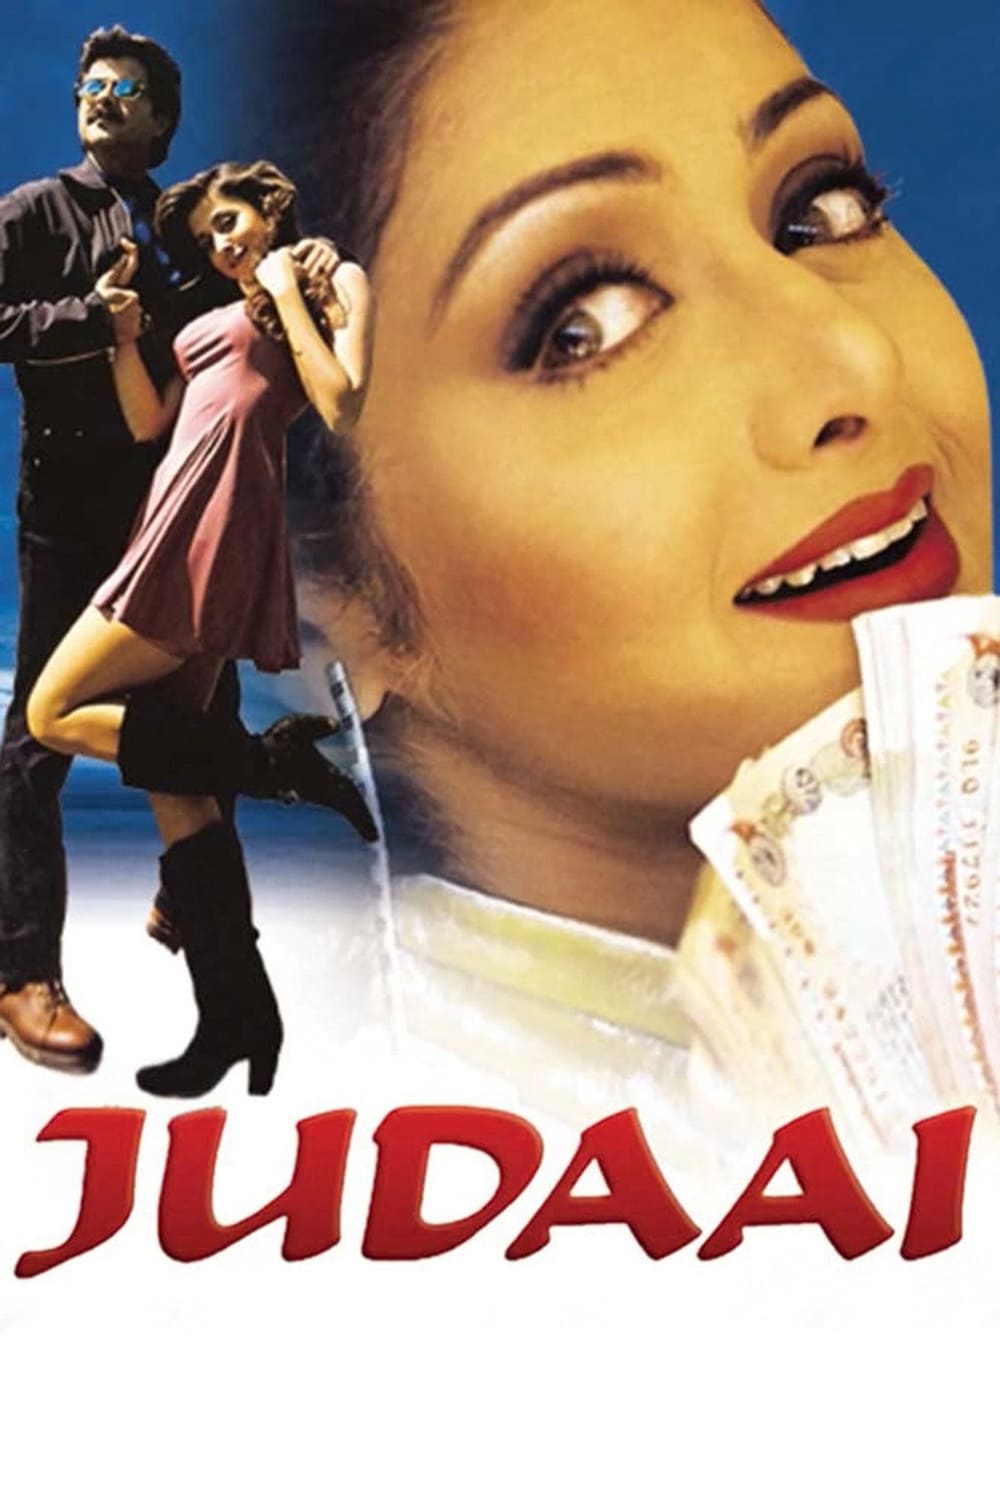 Poster for the movie "Judaai"